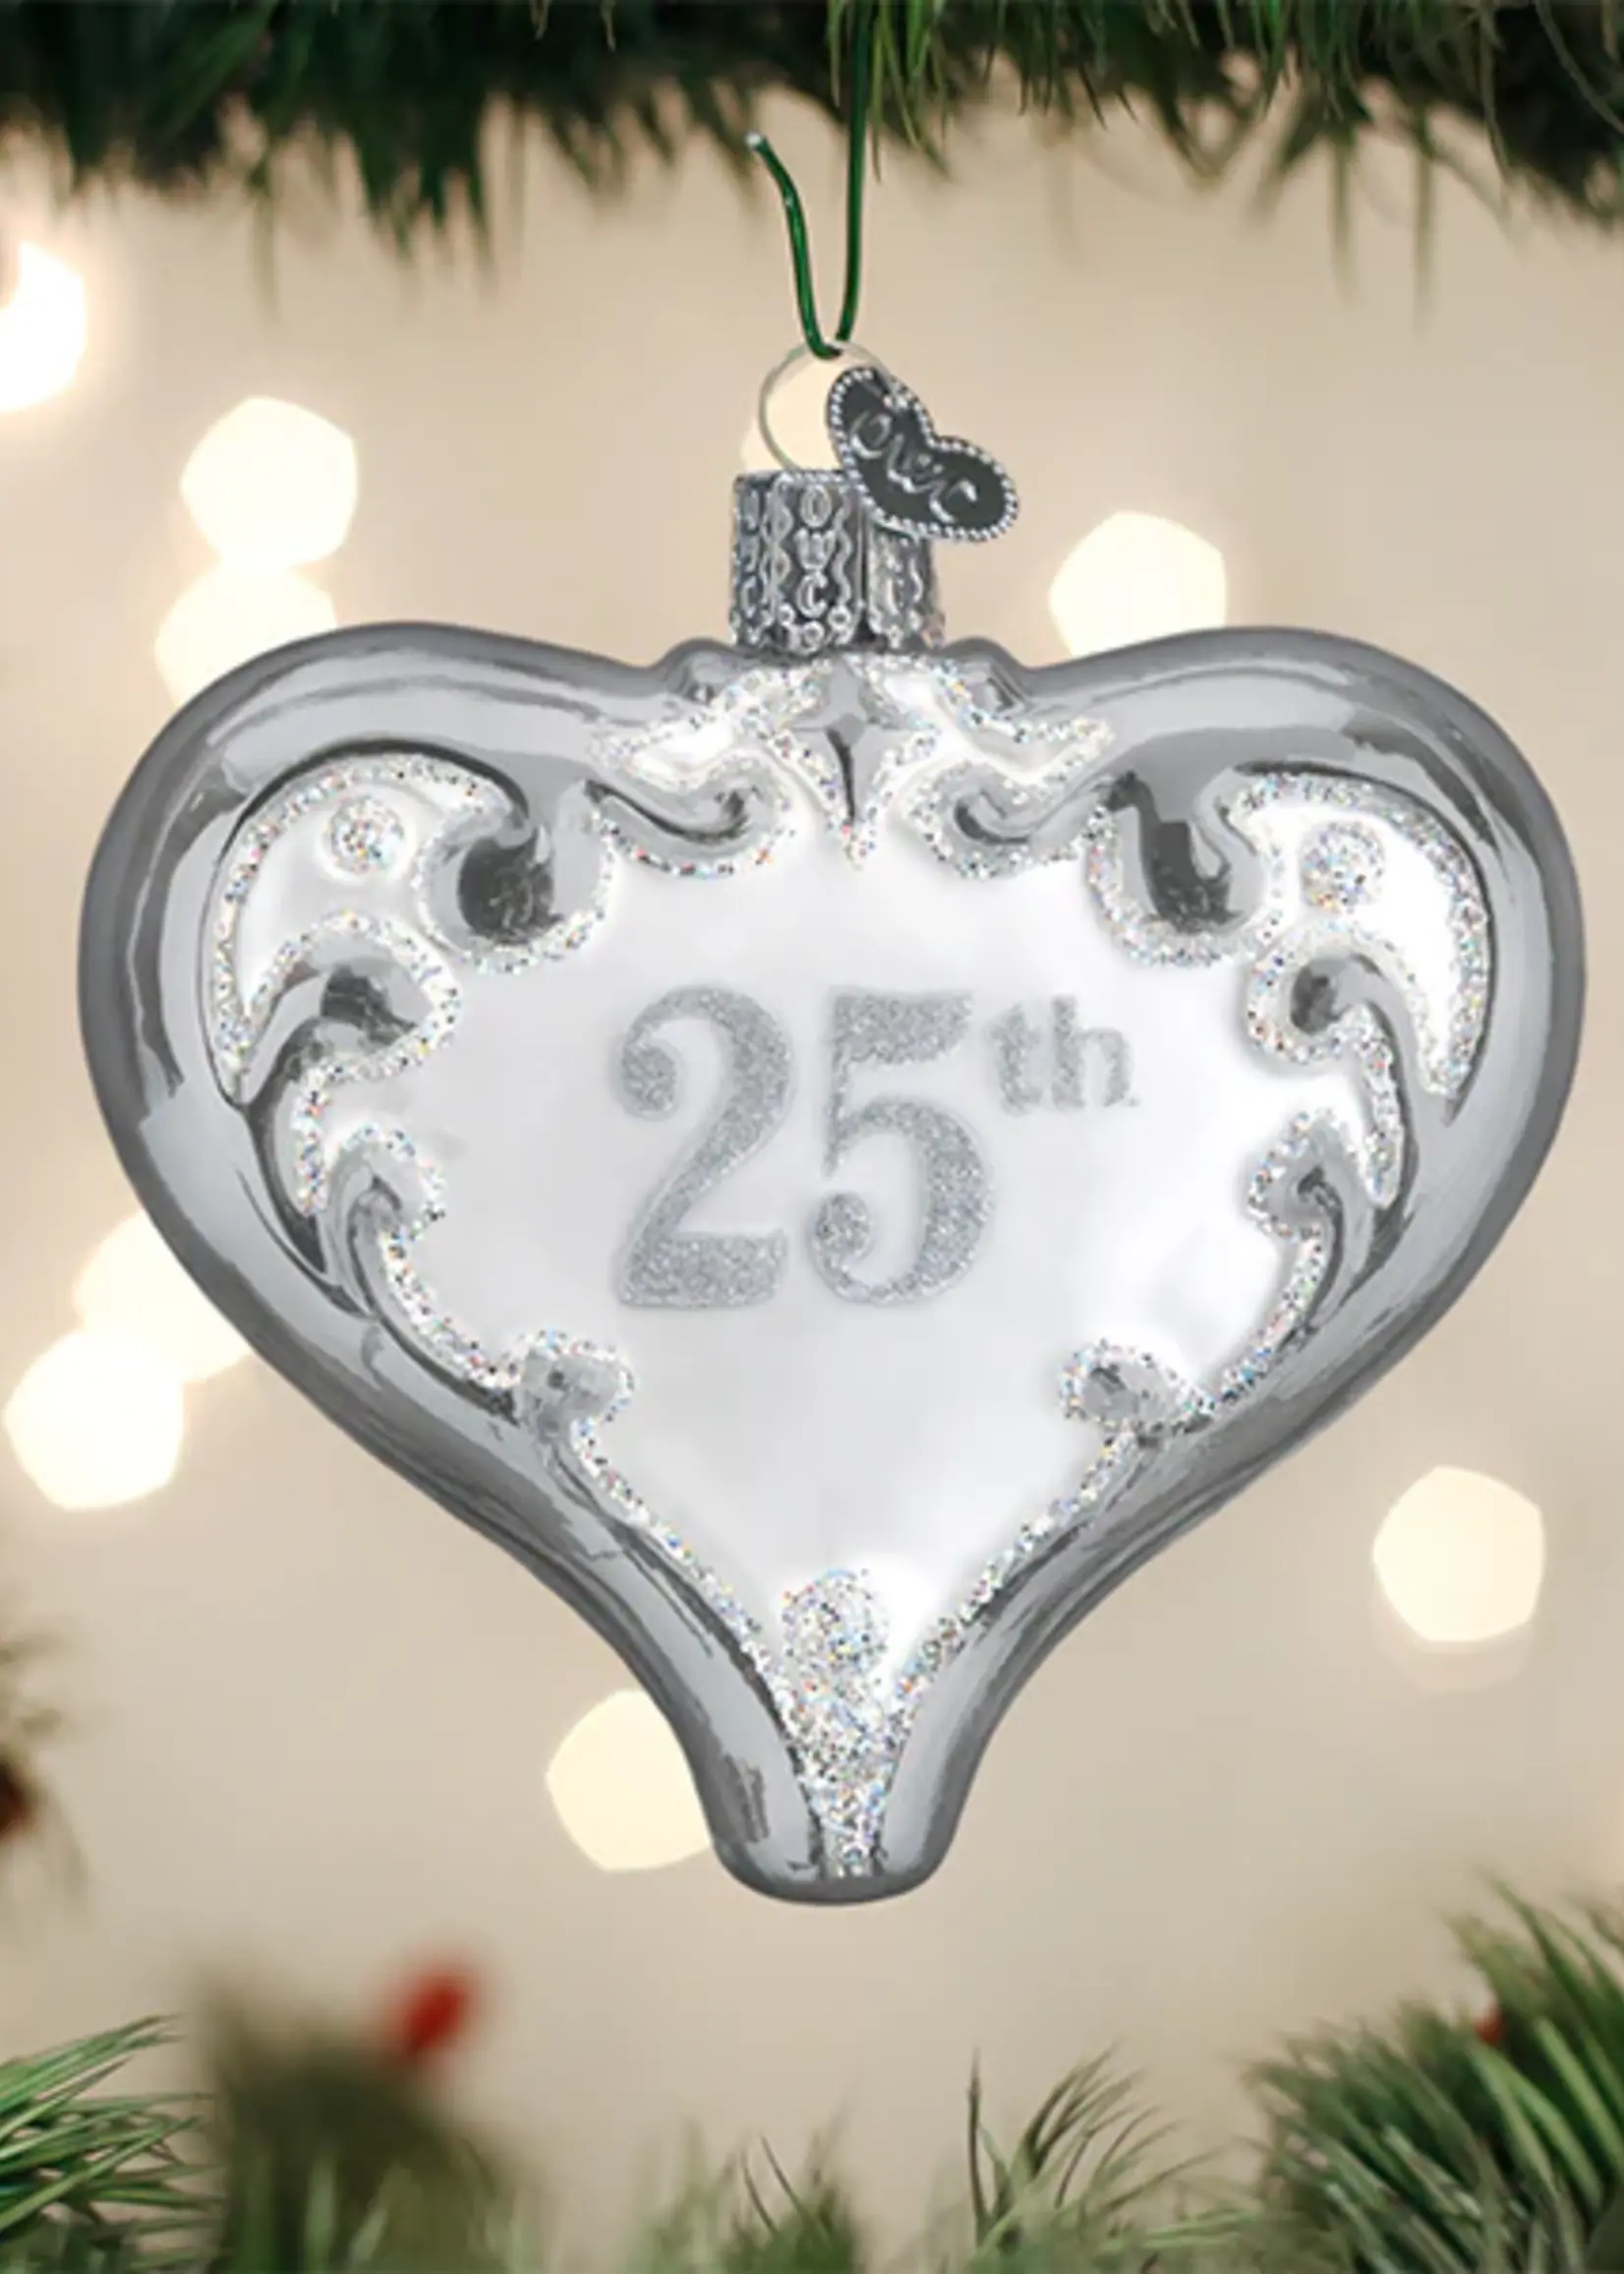 OLD WORLD CHRISTMAS 25TH ANNIVERSARY HEART ORNAMENT